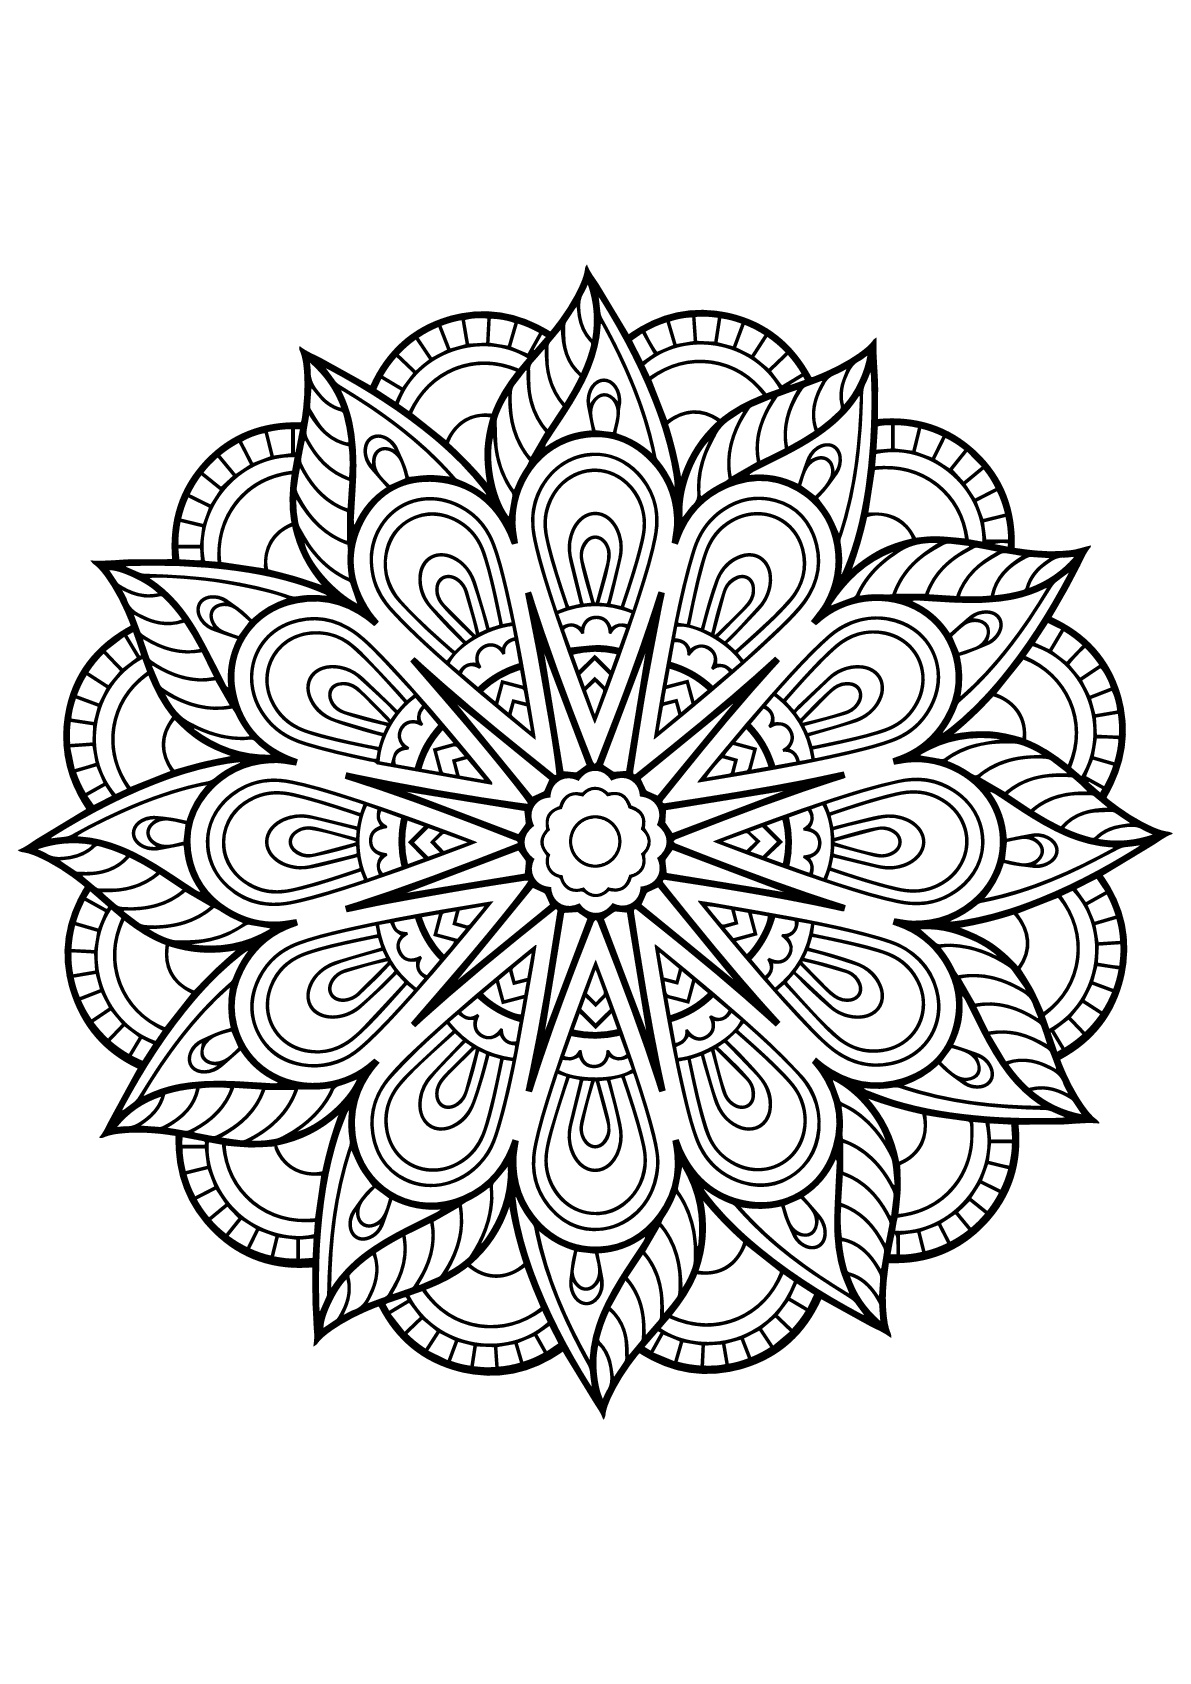 Mandala from free coloring books for adults